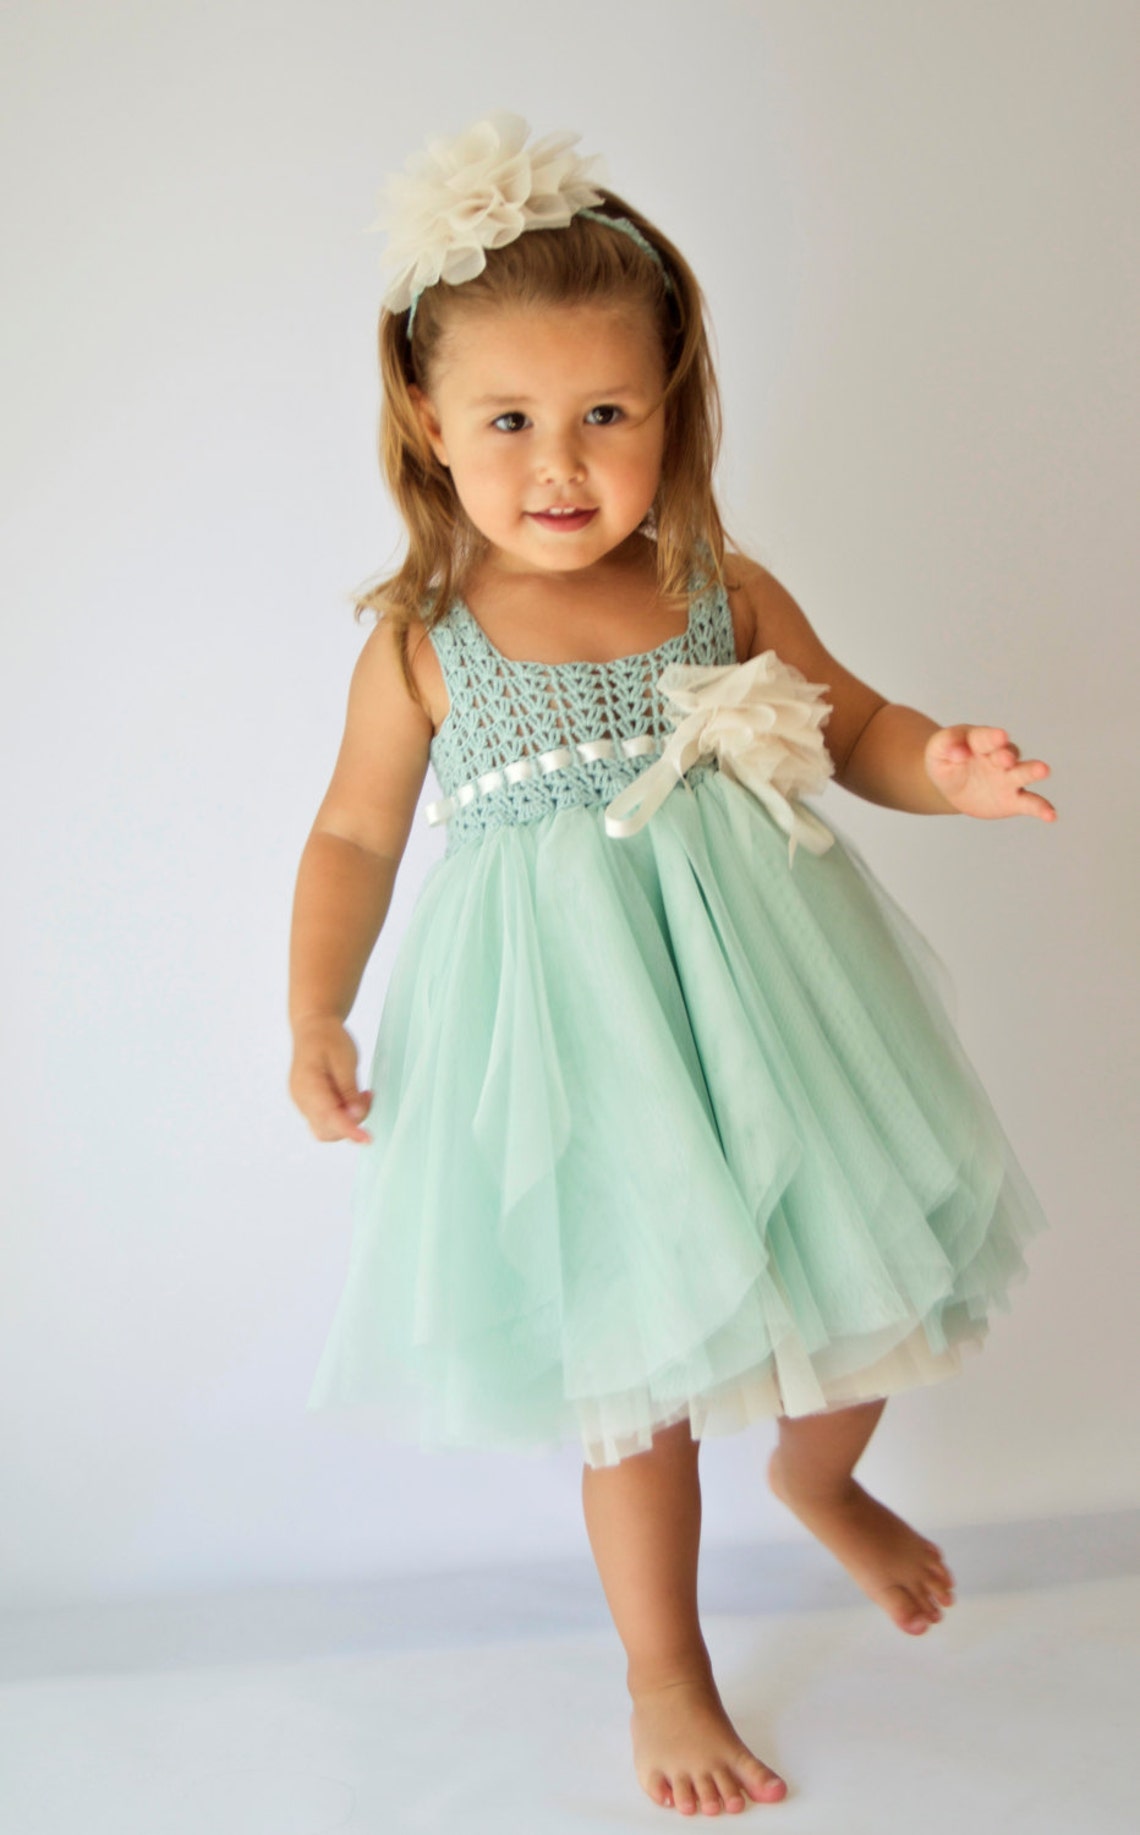 Mint & Cream Tulle Dress With Empire Waist Crochet Top - Etsy